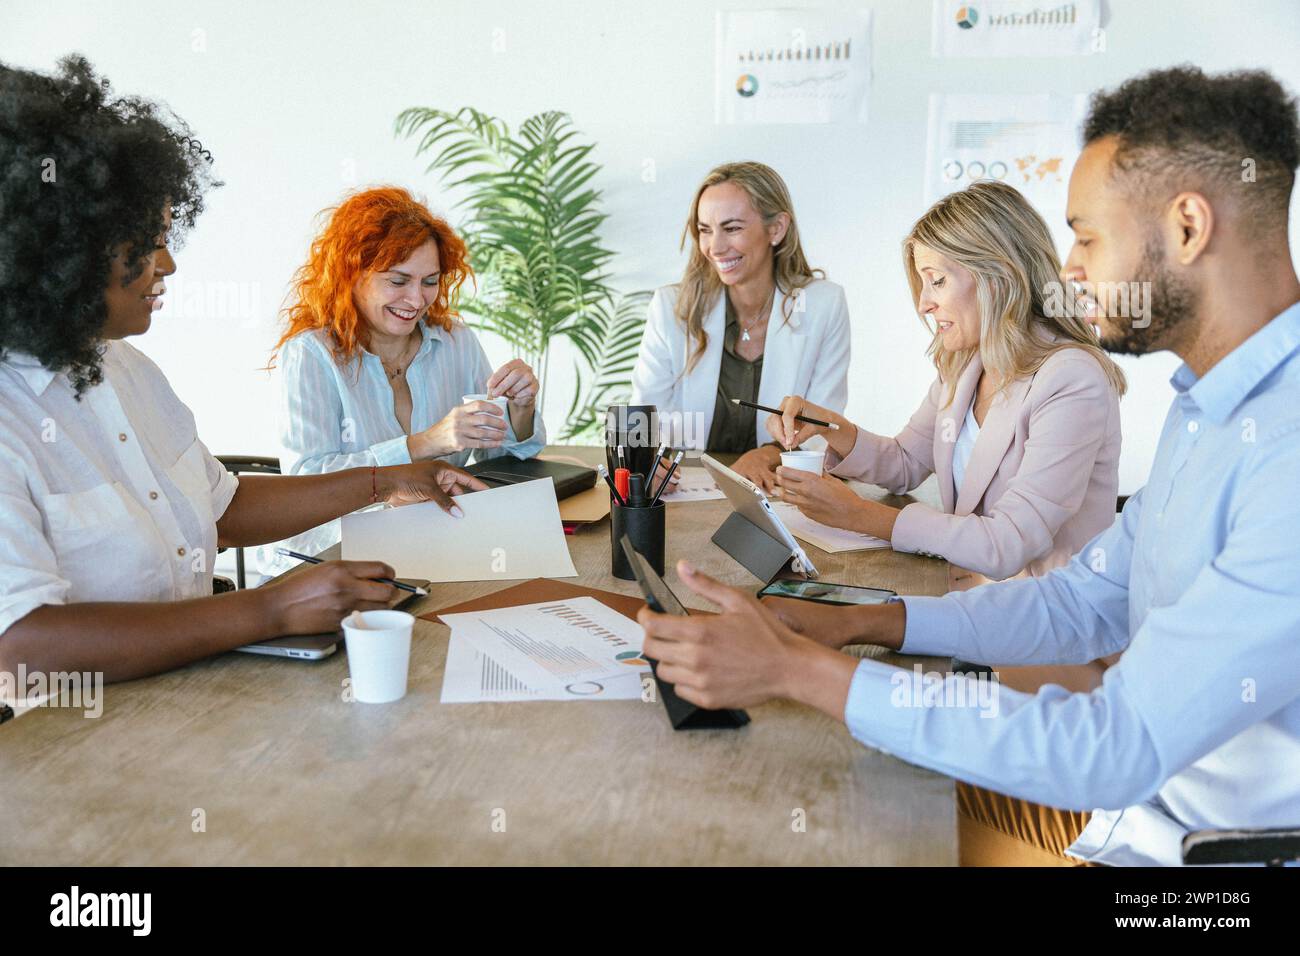 Diverse business people smiling while having a meeting for planning and strategy discussion. Business and brainstorming concept. Stock Photo